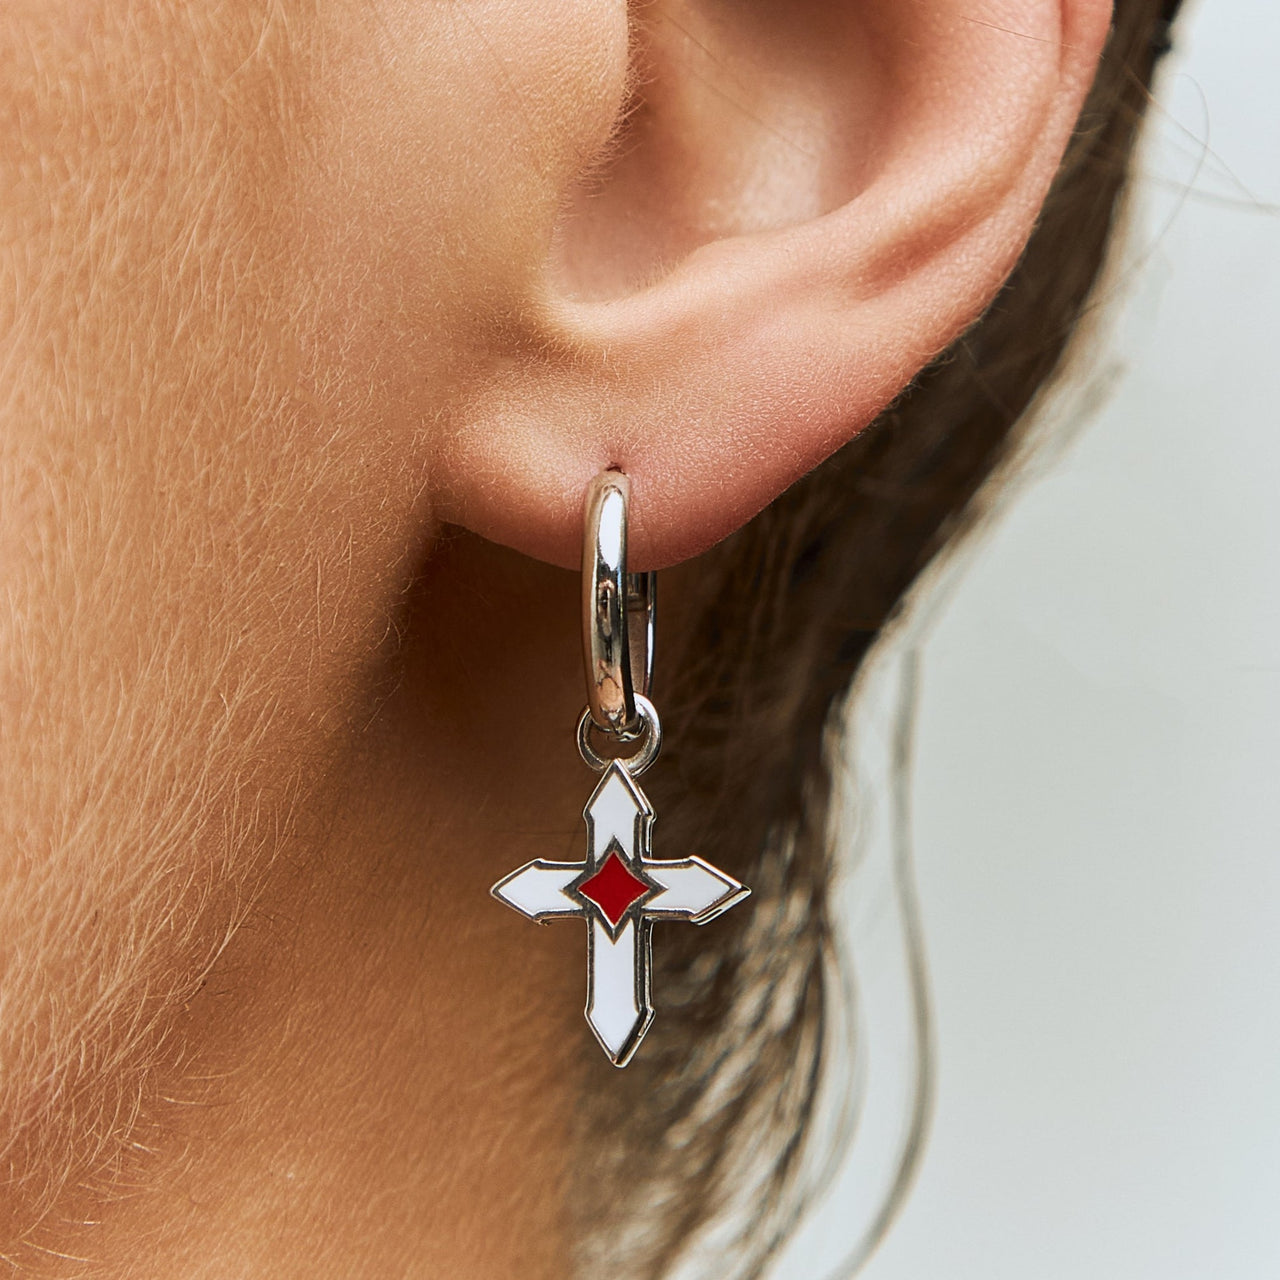 EARRING CROSS “STAINED GLASS” / SILVER & COLORED ENAMEL